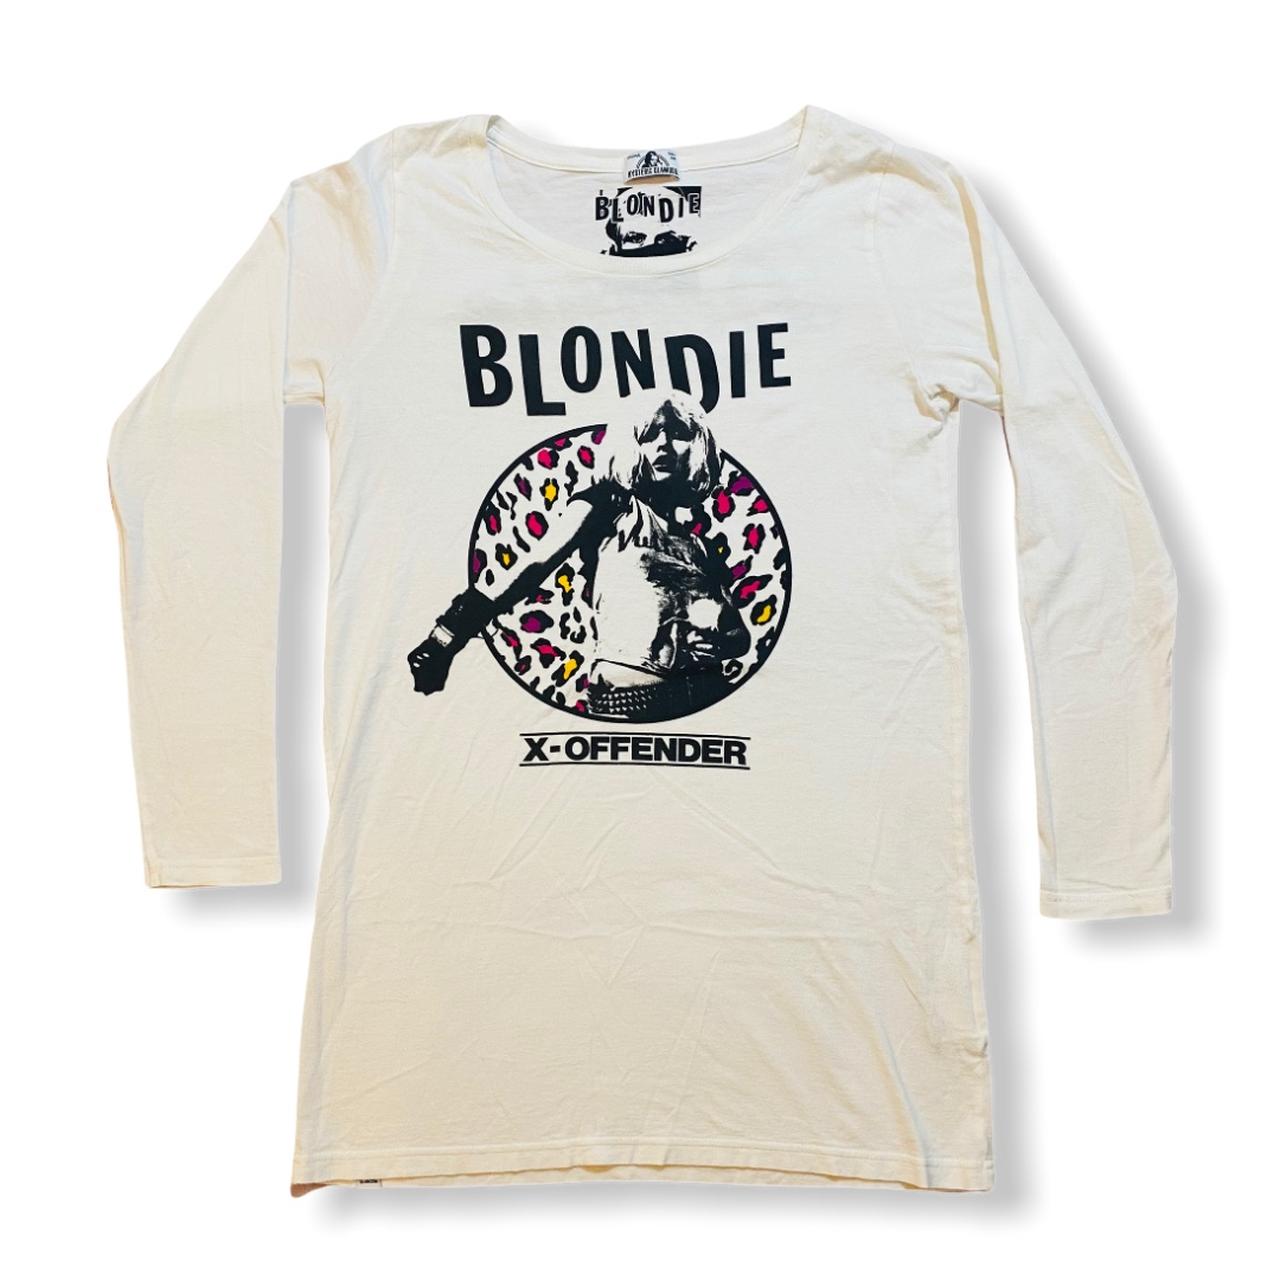 HYSTERIC GLAMOUR×BLONDIE T-shirt-